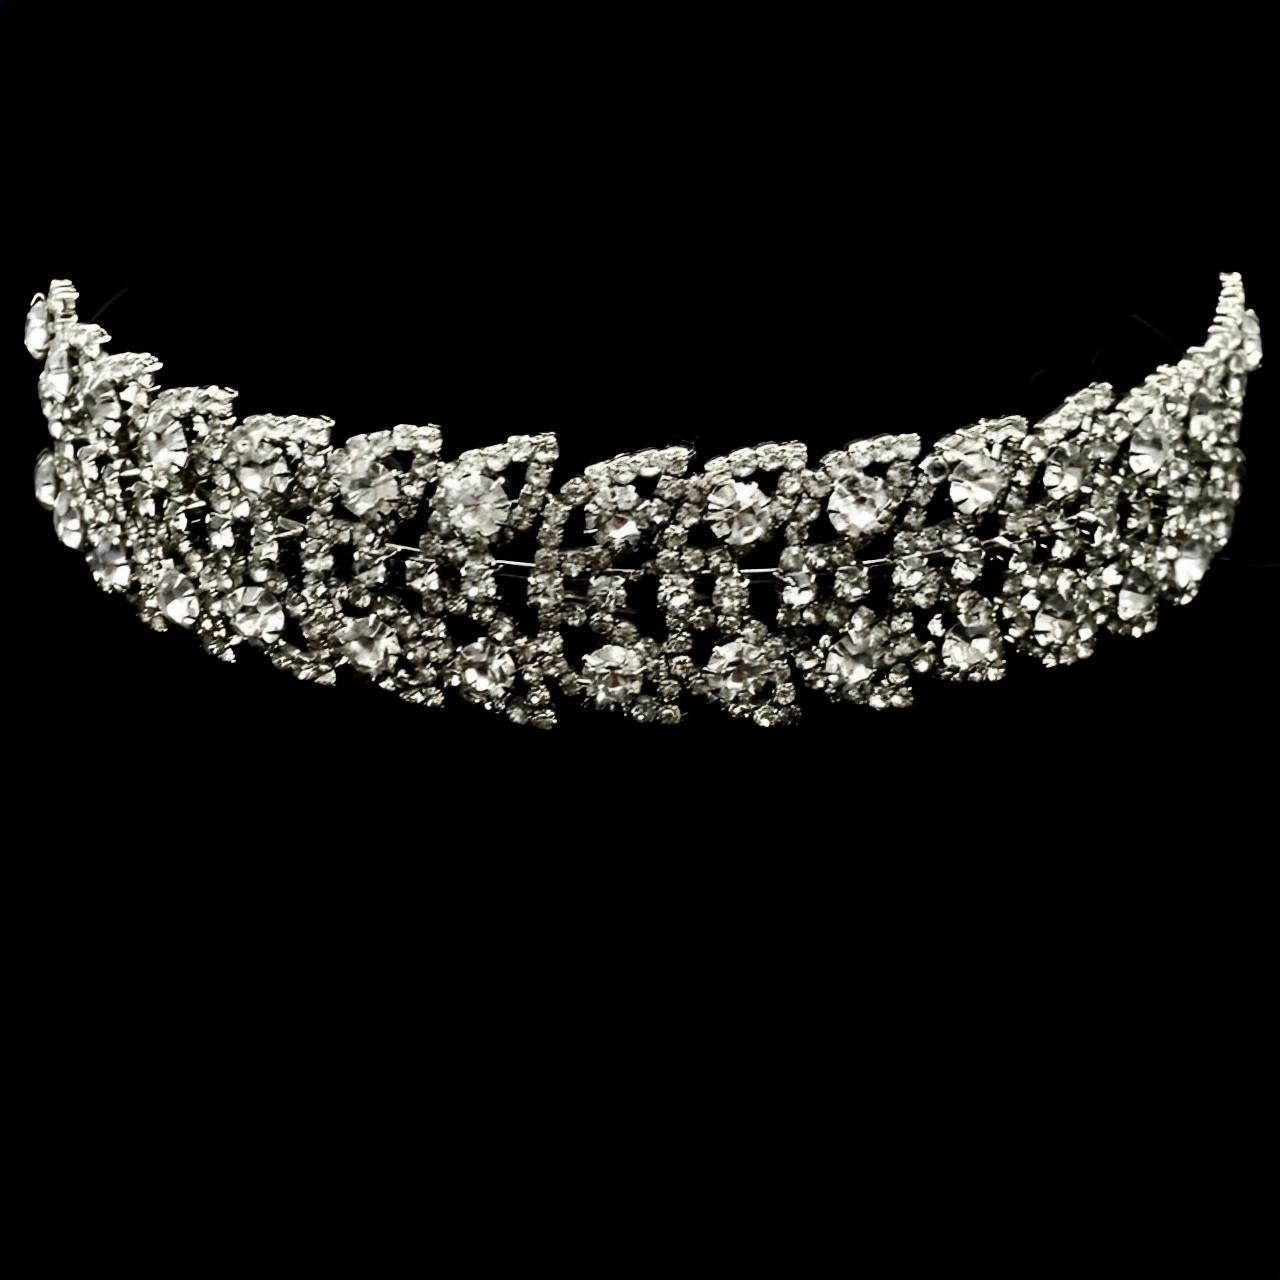 Silver Plated Tiara / Headband with Faceted Rhinestones circa 1980s 1